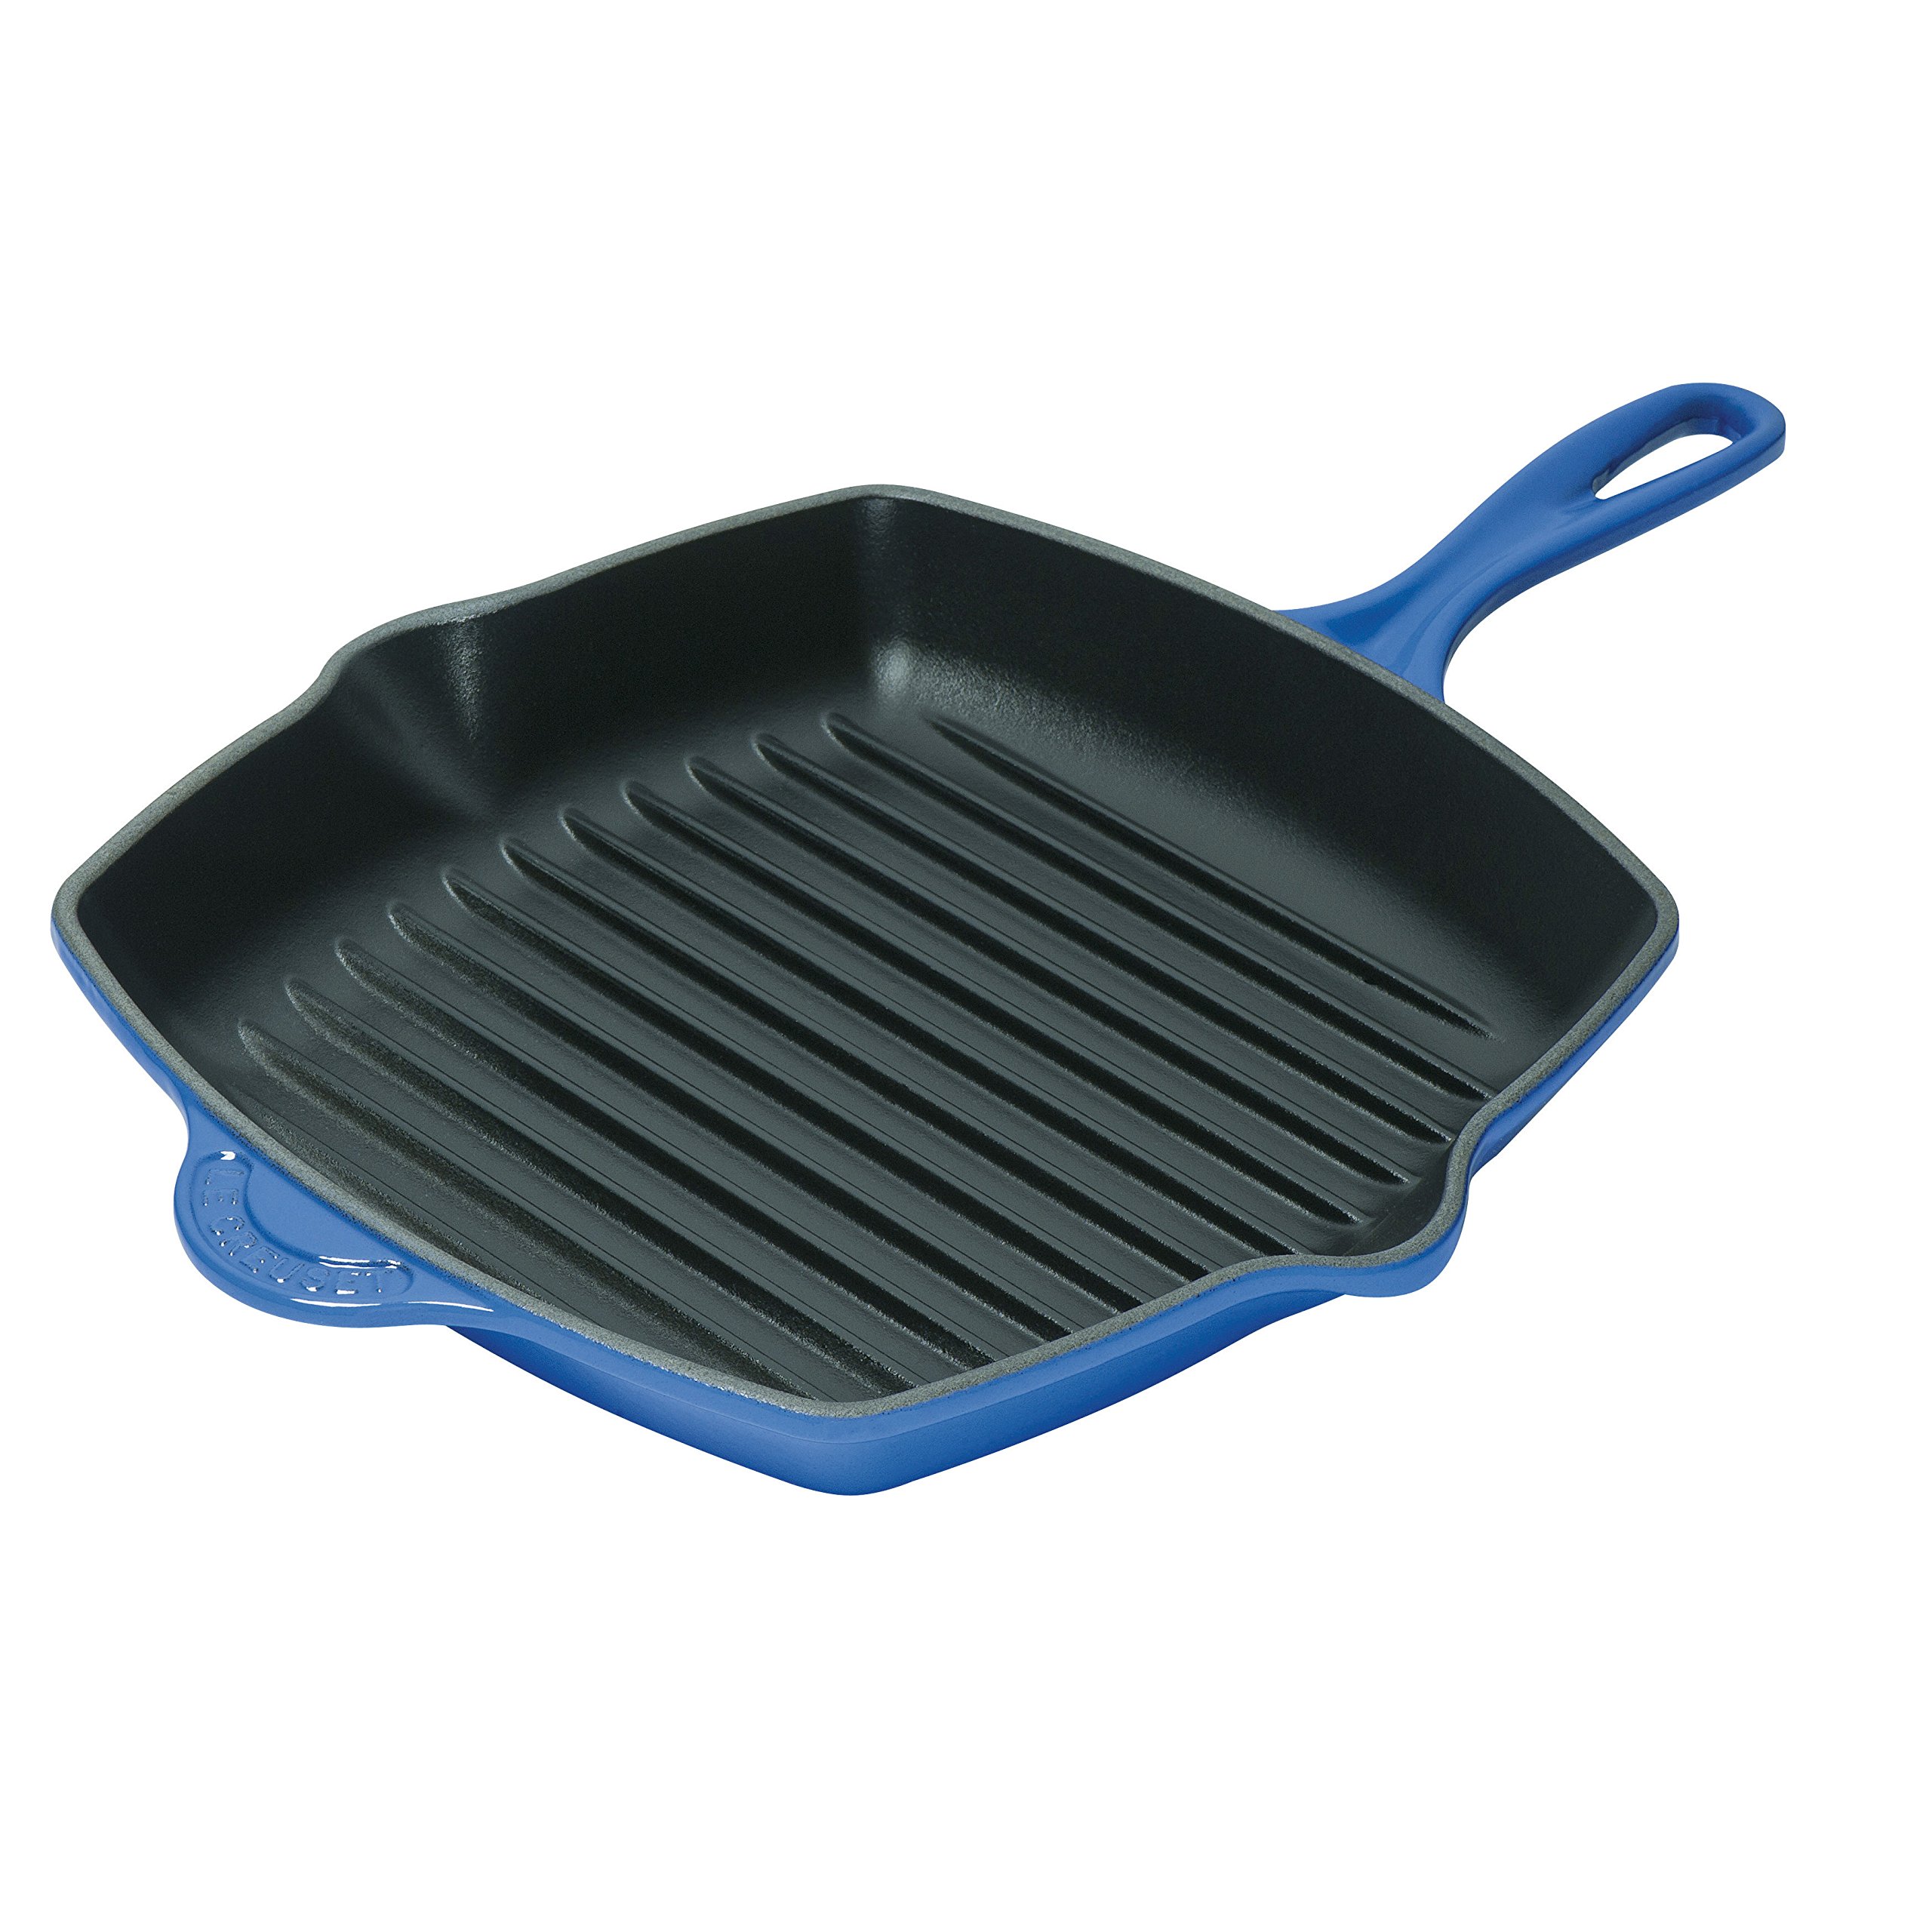 Le Creuset Enameled Cast-Iron 10-1/4-Inch Square Skillet Grill, Marseille